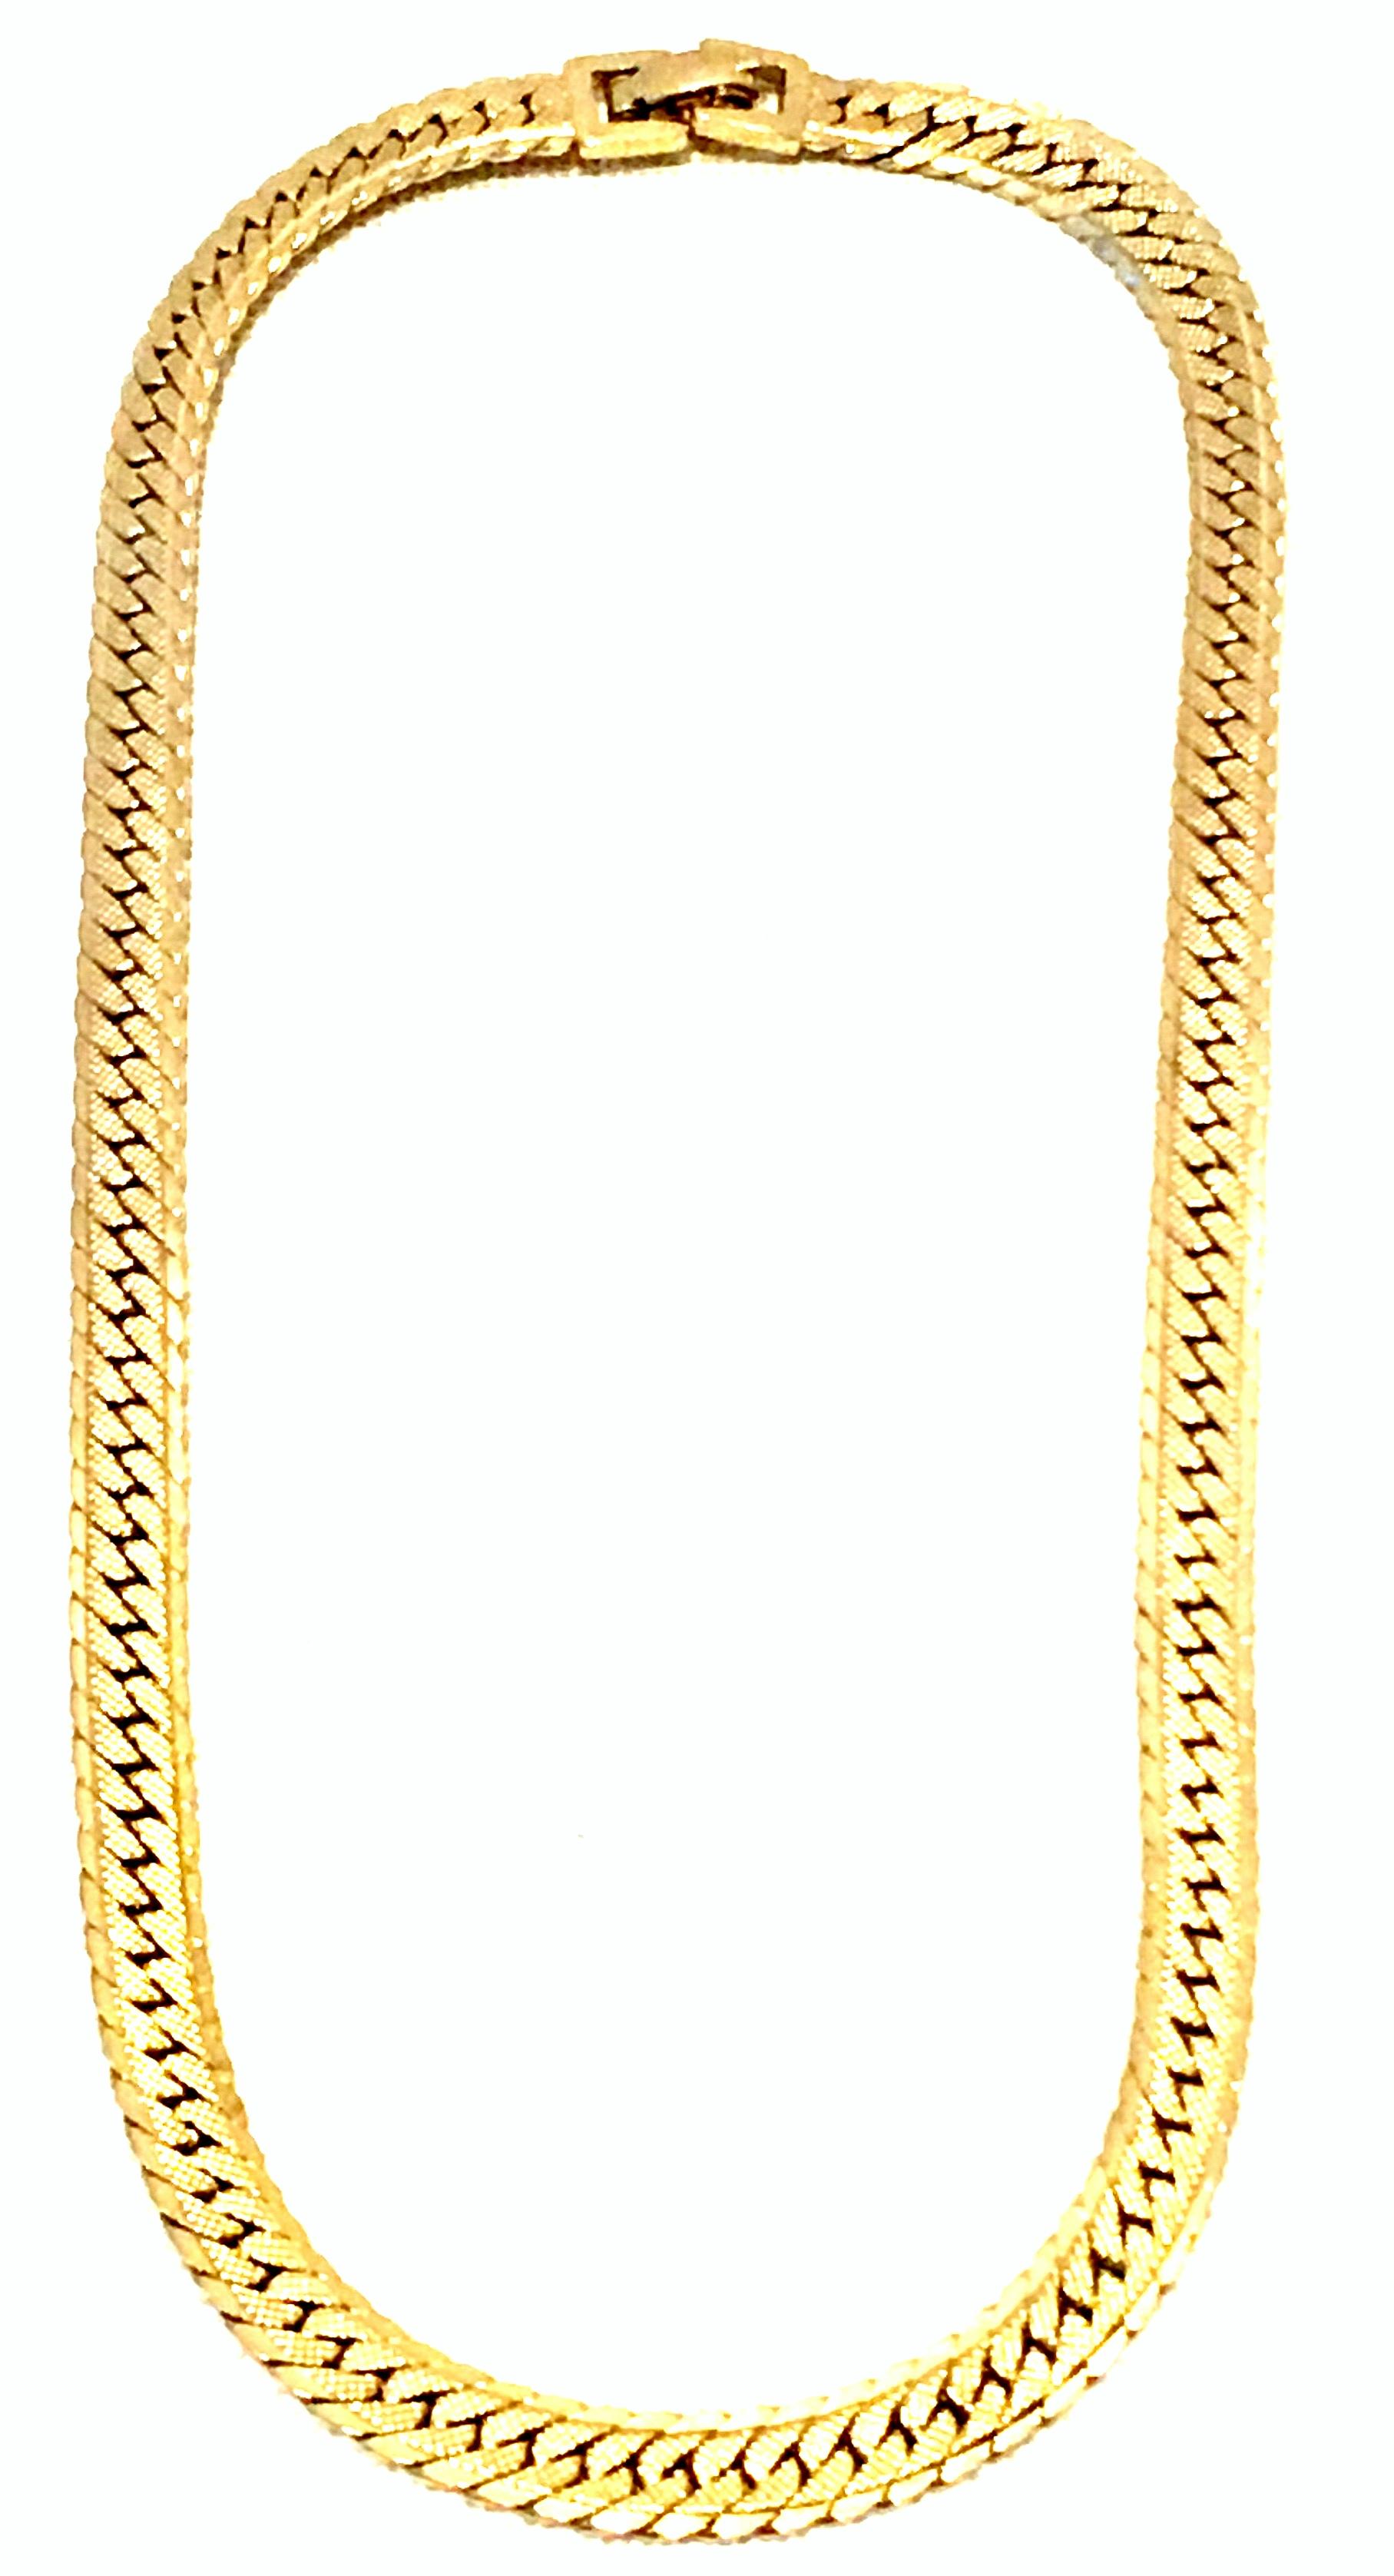 20th Century Gold Plate Classic Choker Necklace By, Monet. Signed on the fold over box style clasp, Monet.